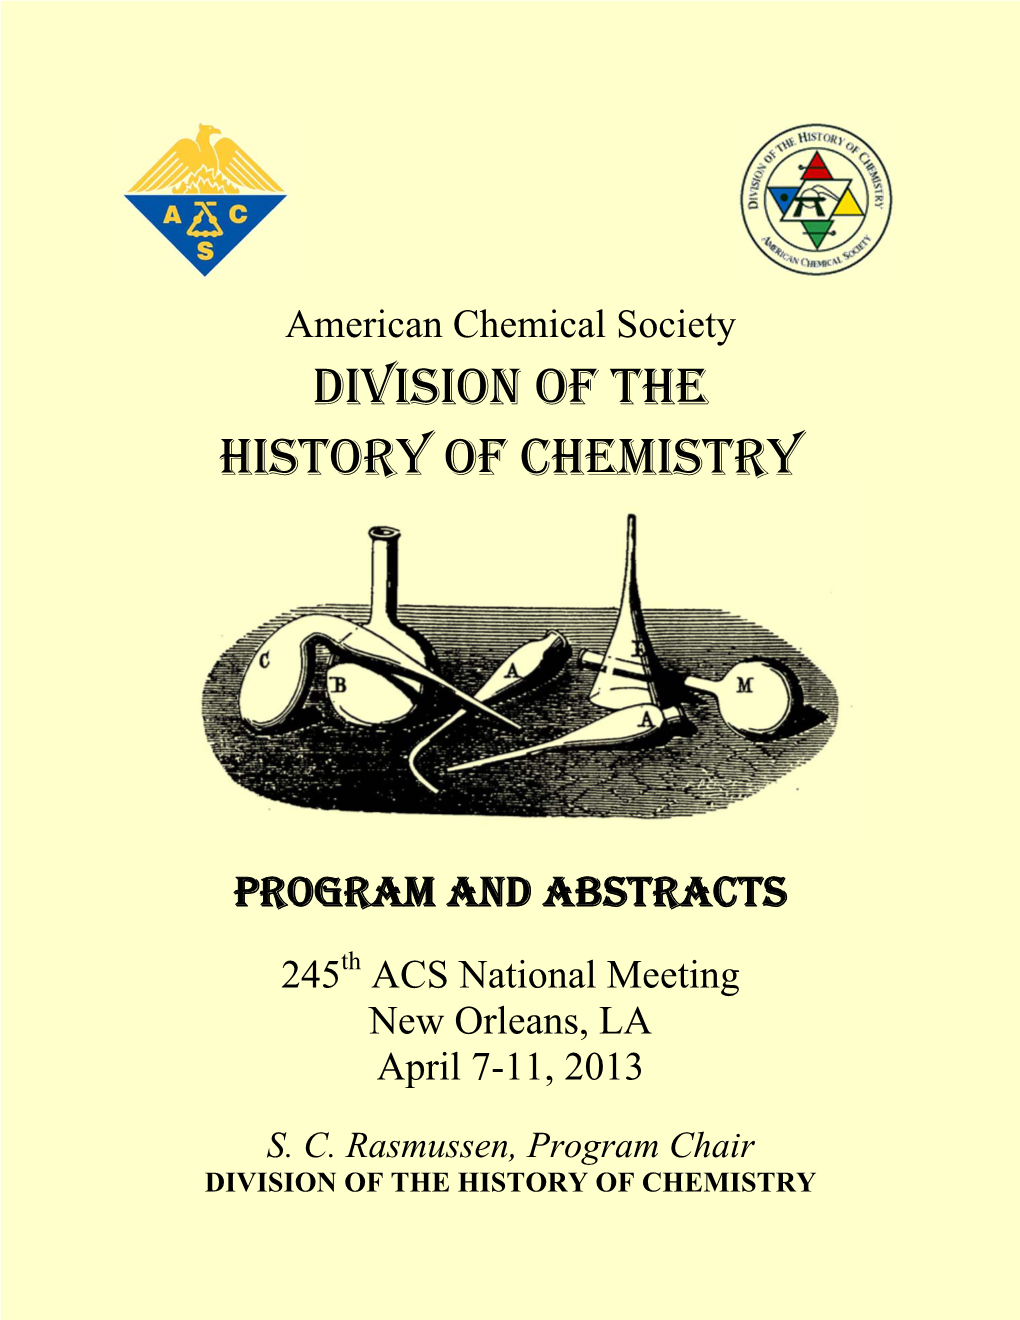 Division of the History of Chemistry